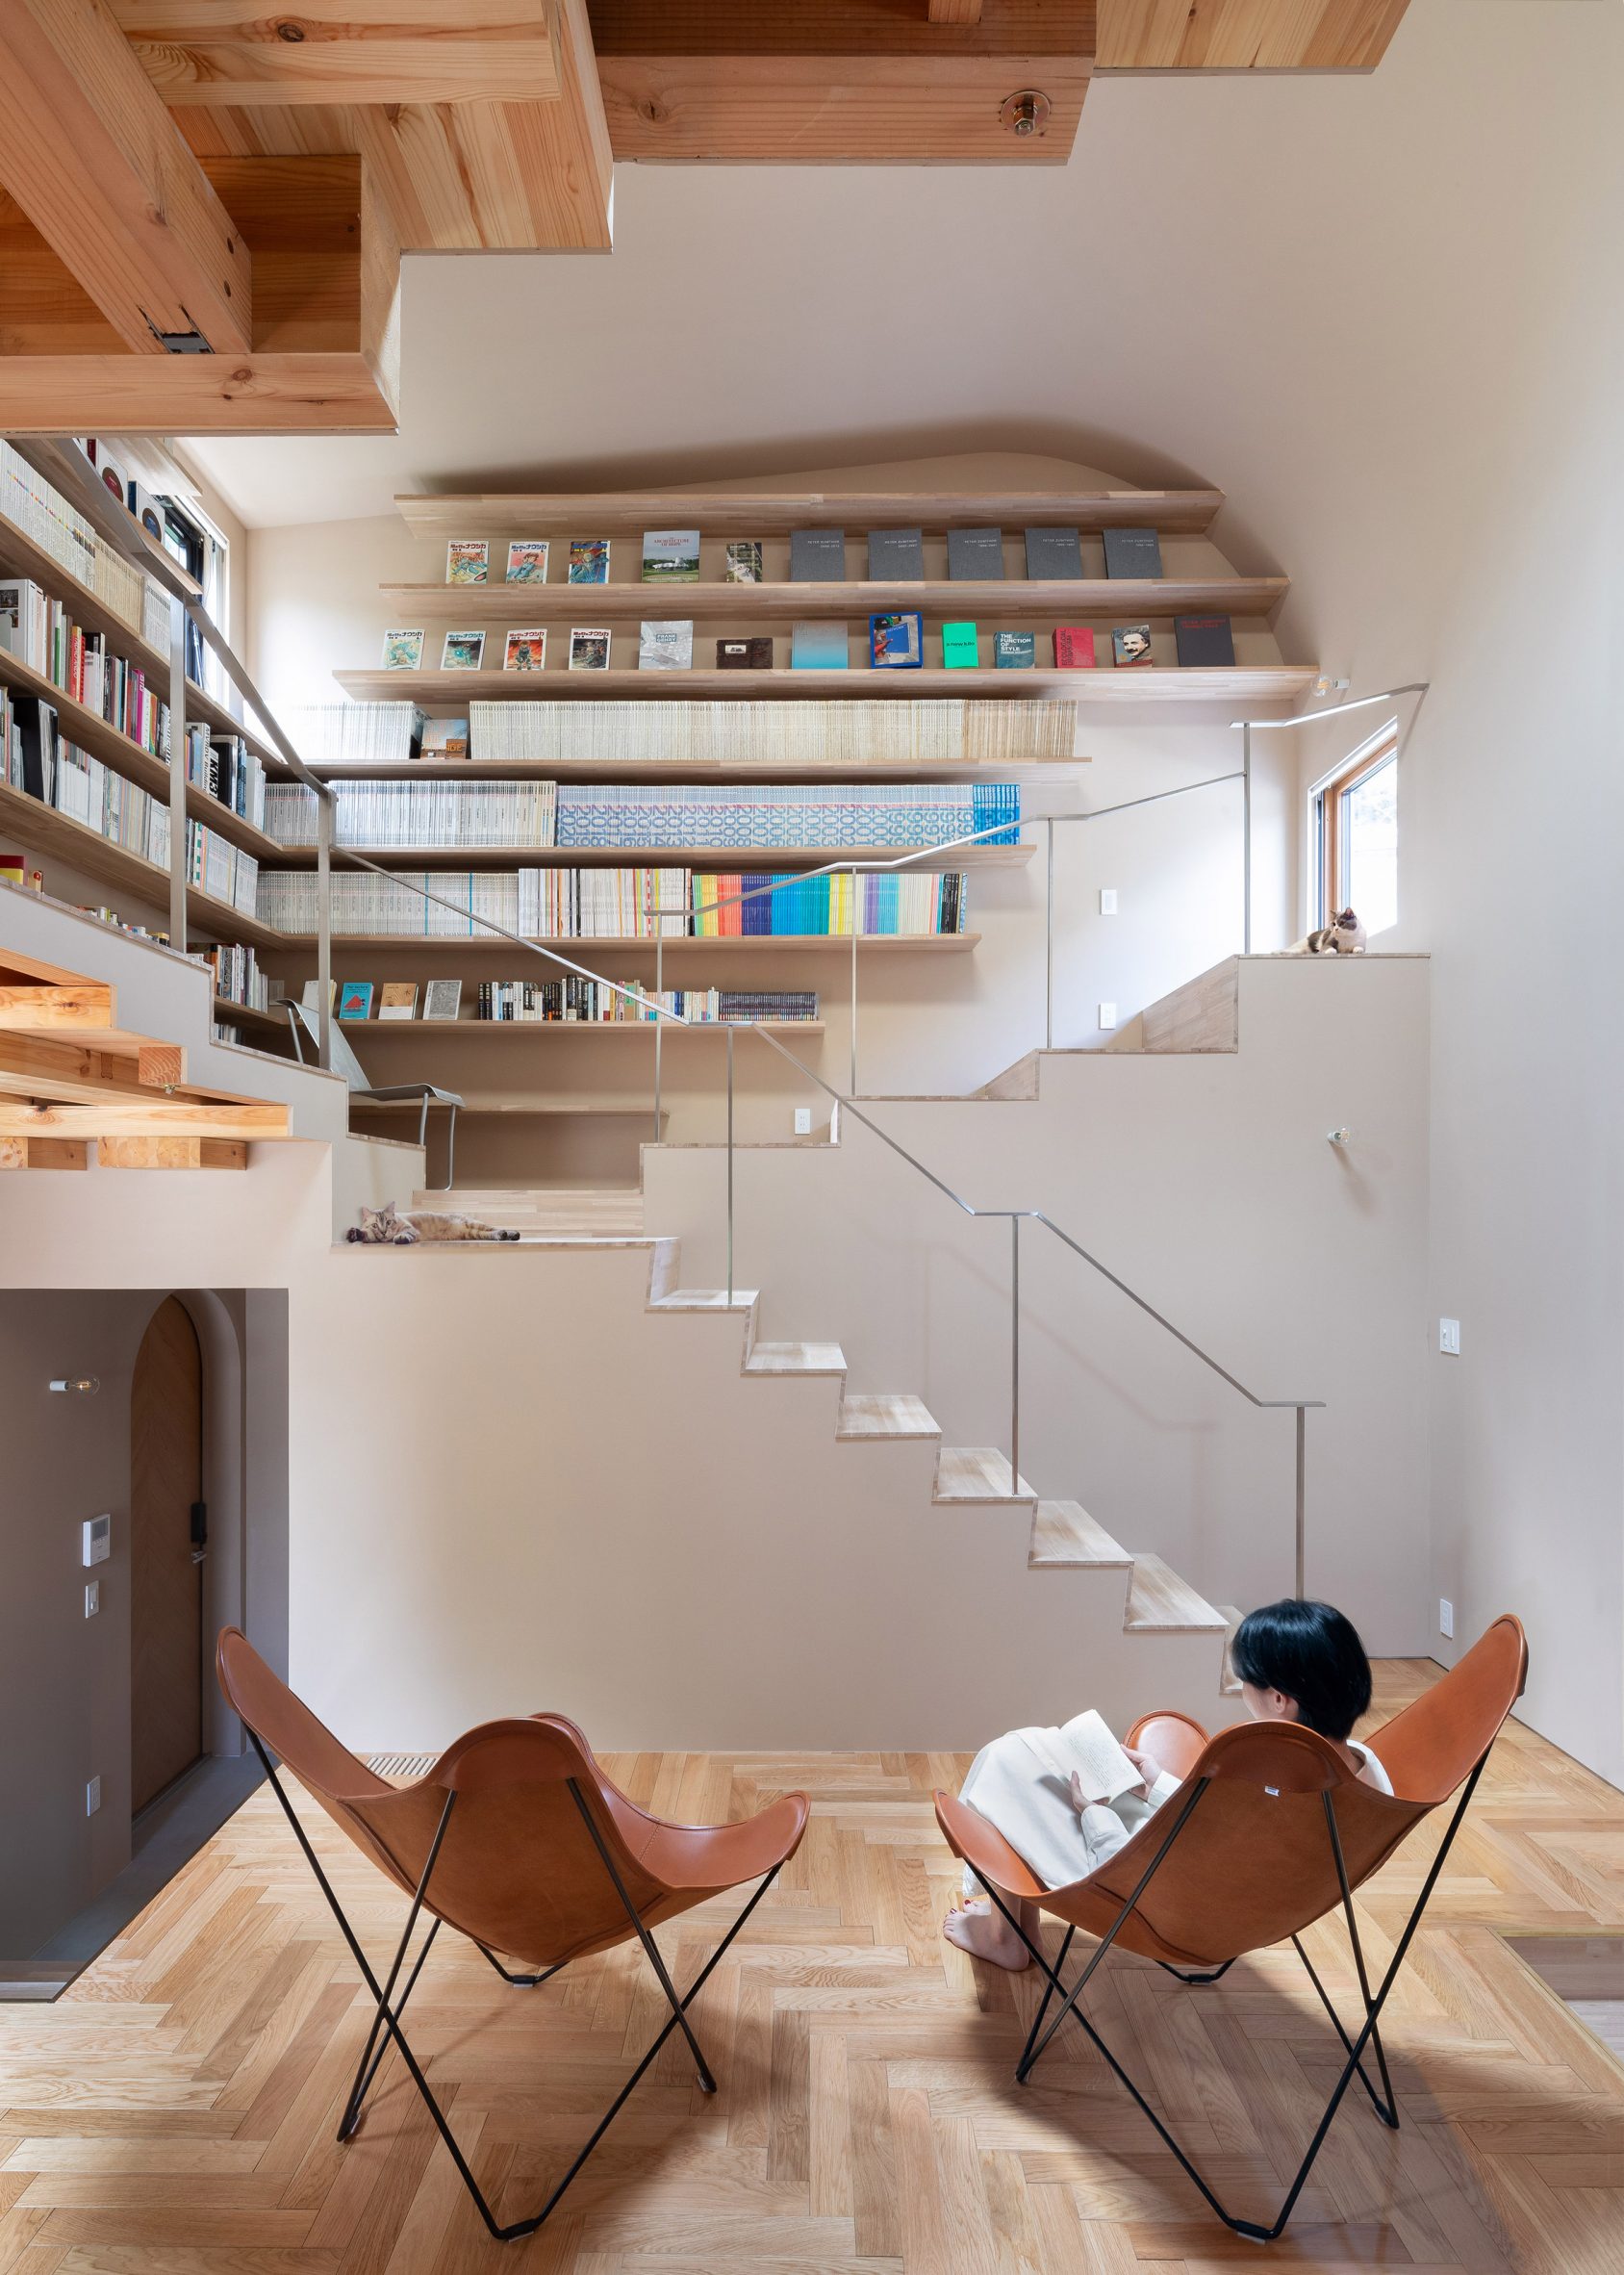 House designed for cats in Japan